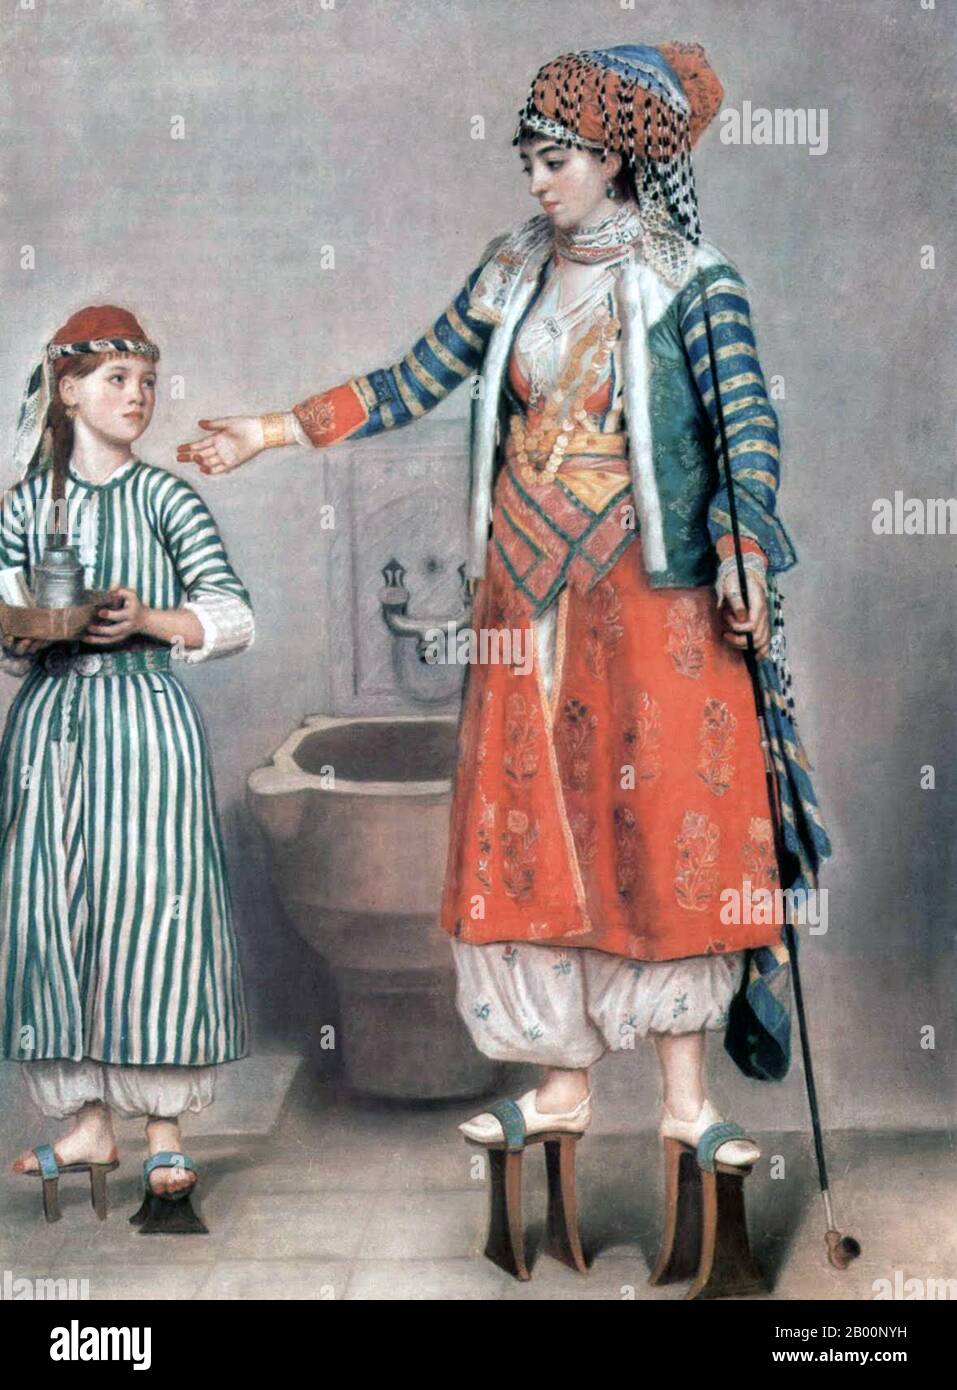 Turkey/Switzerland: 'Ottoman fashion - Turkish lady with maid servant'. Pastel on vellum painting by Jean-Étienne Liotard (1702-1789), 1742-1743.  The clothing of Muslims, Christians, Jews, clergy, tradesmen, state and military officials was strictly regulated during the reign of Suleiman the Magnificent (1494-1566). Political crises of the 17th century were reflected as chaos in fashion. The excessively luxurious compulsion of consumption and pretentiousness in the 'Period of Tulips' lasted until the 19th century. Stock Photo